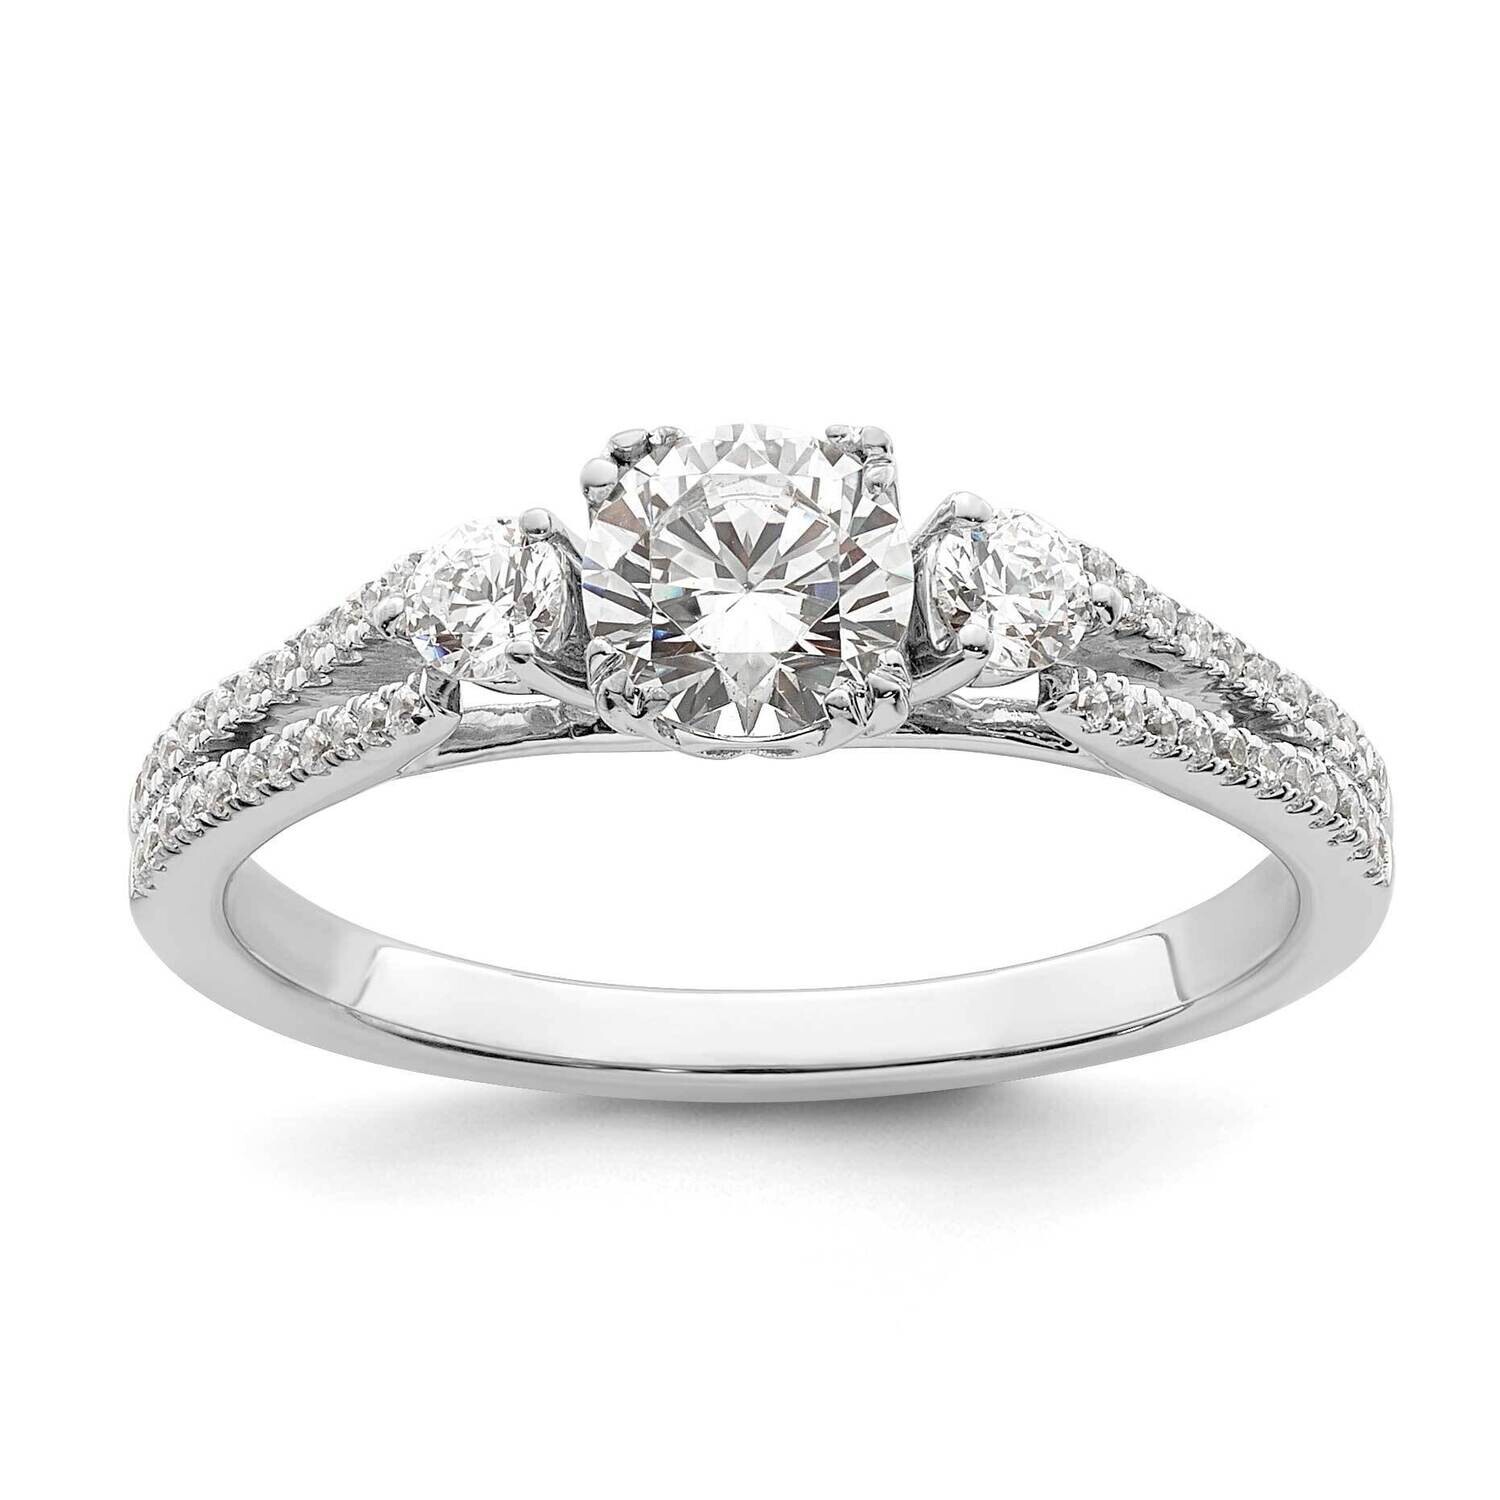 3-Stone Plus Holds 1/2 Carat 5.2mm Round Center Includes 1/4 Carat Tw. Side Stones Semi-Mount Engagement Ring 14k White Gold RM7840E-050-WAA